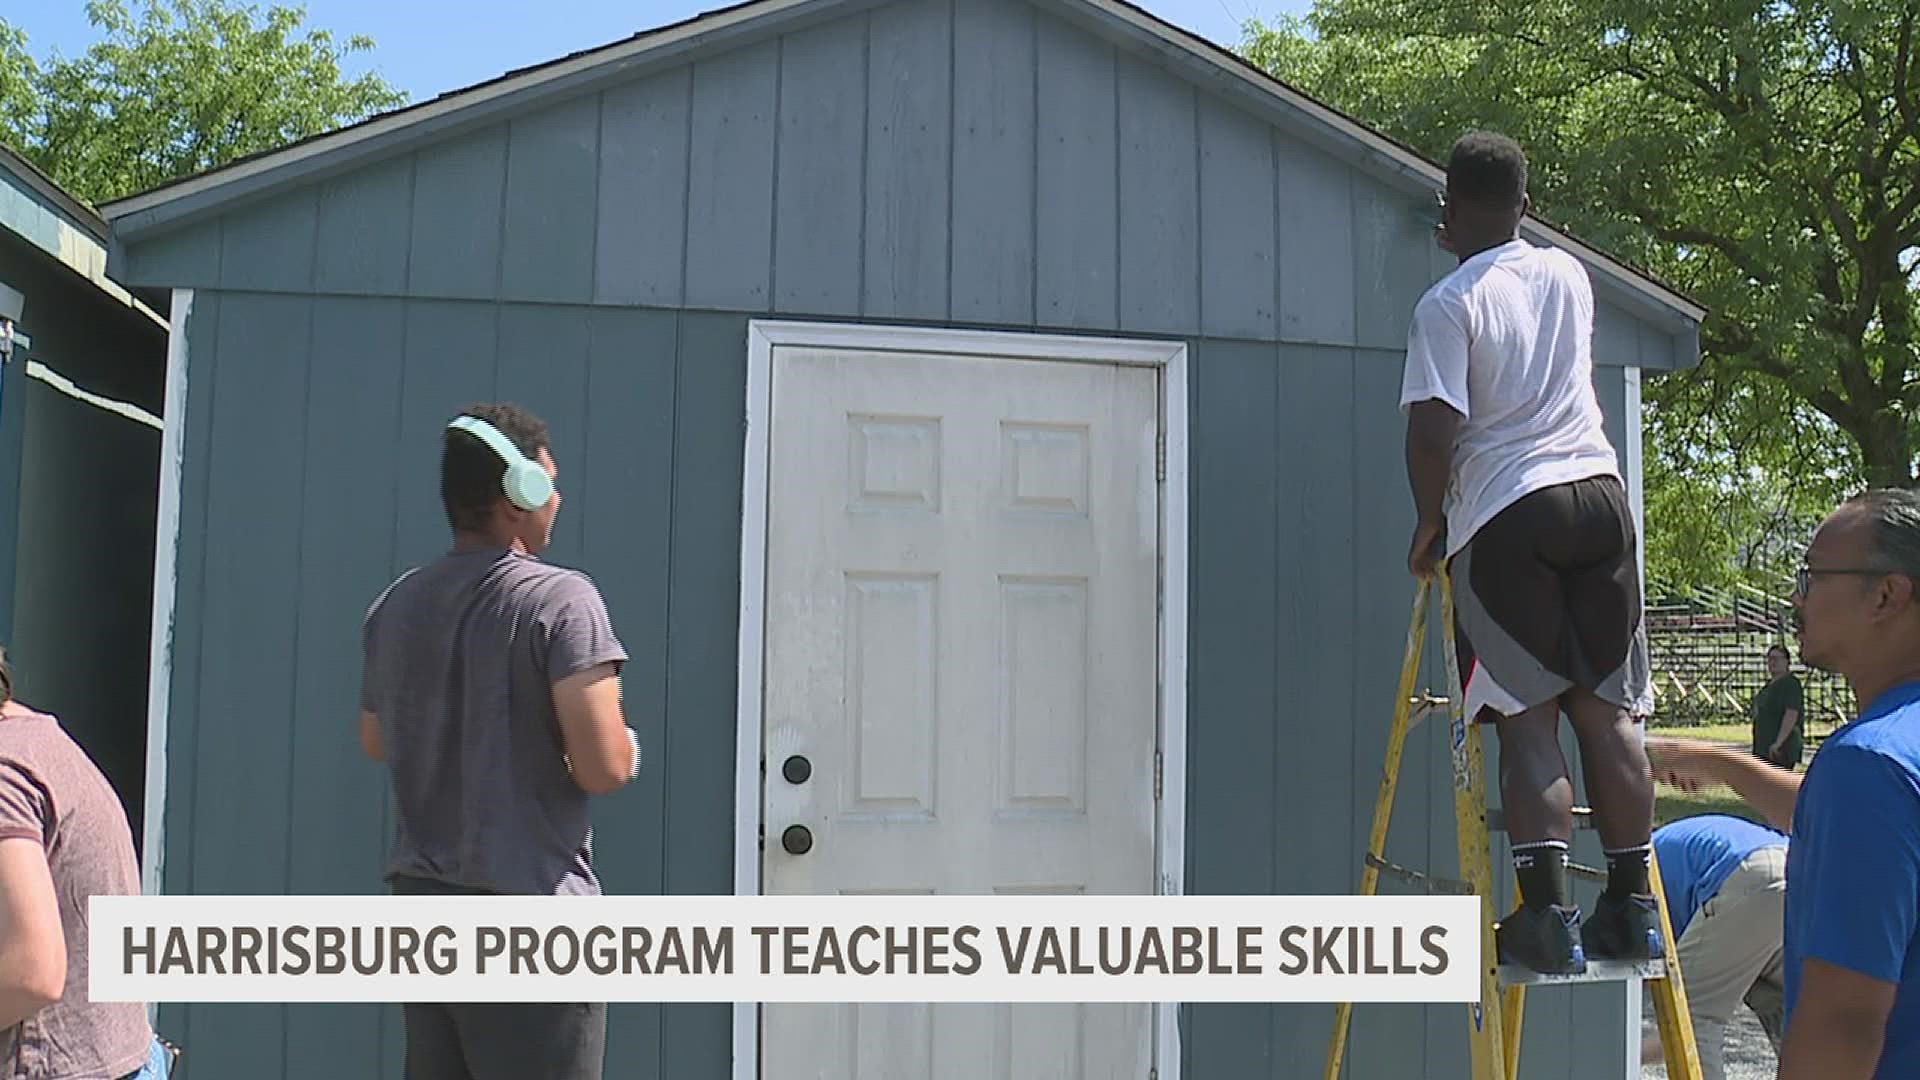 The Harrisburg Goodwill Keystone Area and Office of Vocational Rehabilitation sponsored 10 people to do jobs around the city such as painting and gardening.